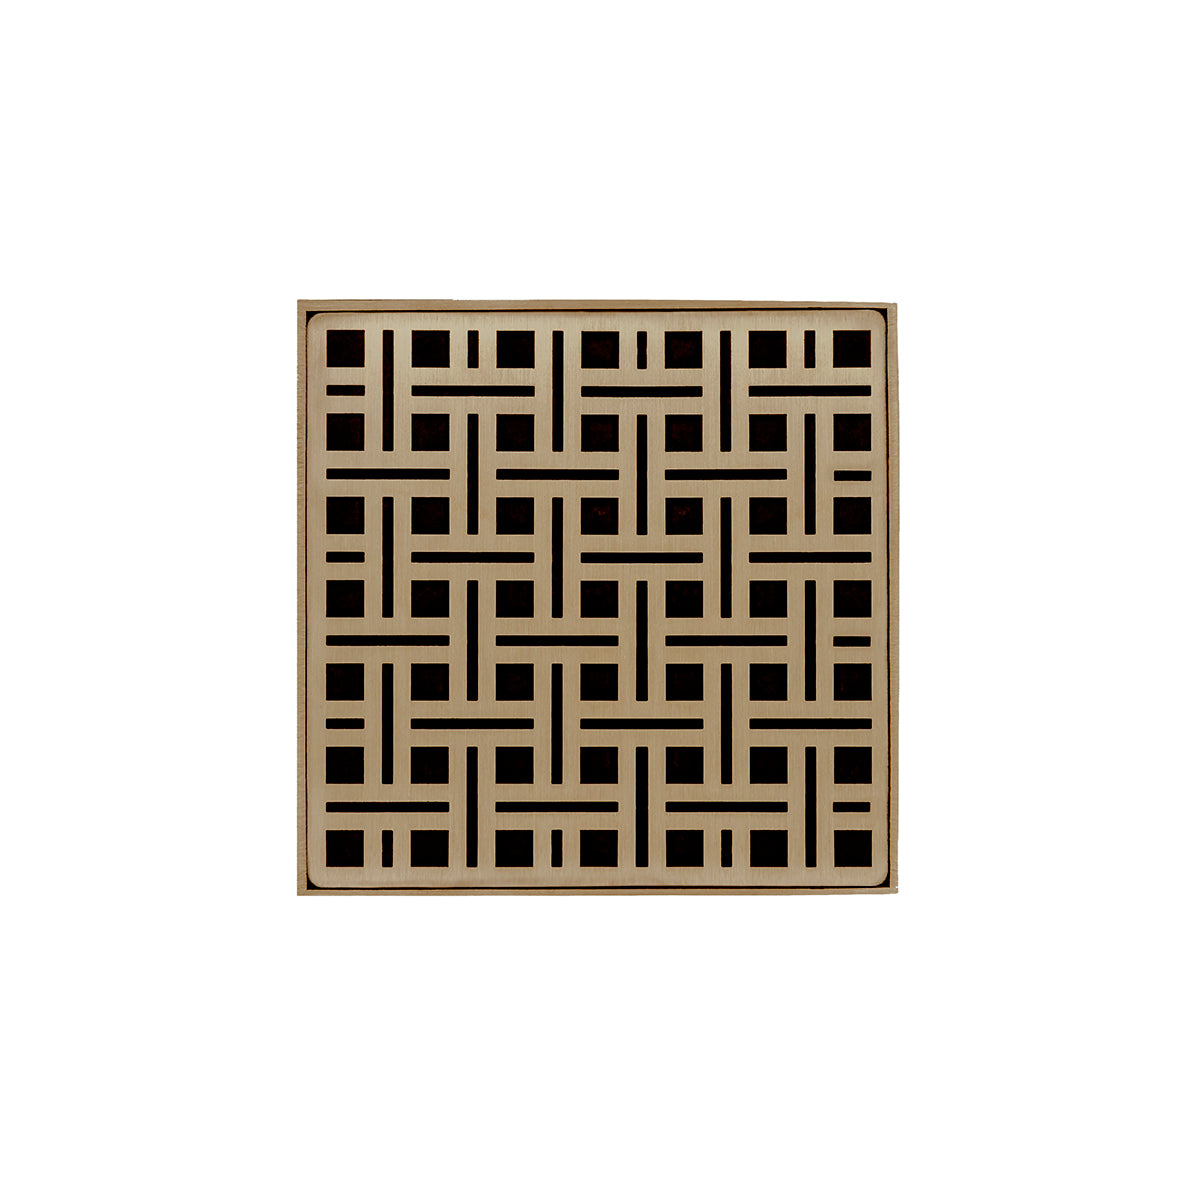 Infinity Drain 5" x 5" VDB 5 Premium Center Drain Kit with Weave Pattern Decorative Plate with PVC Bonded Flange Drain Body, 2", 3" and 4" Outlet